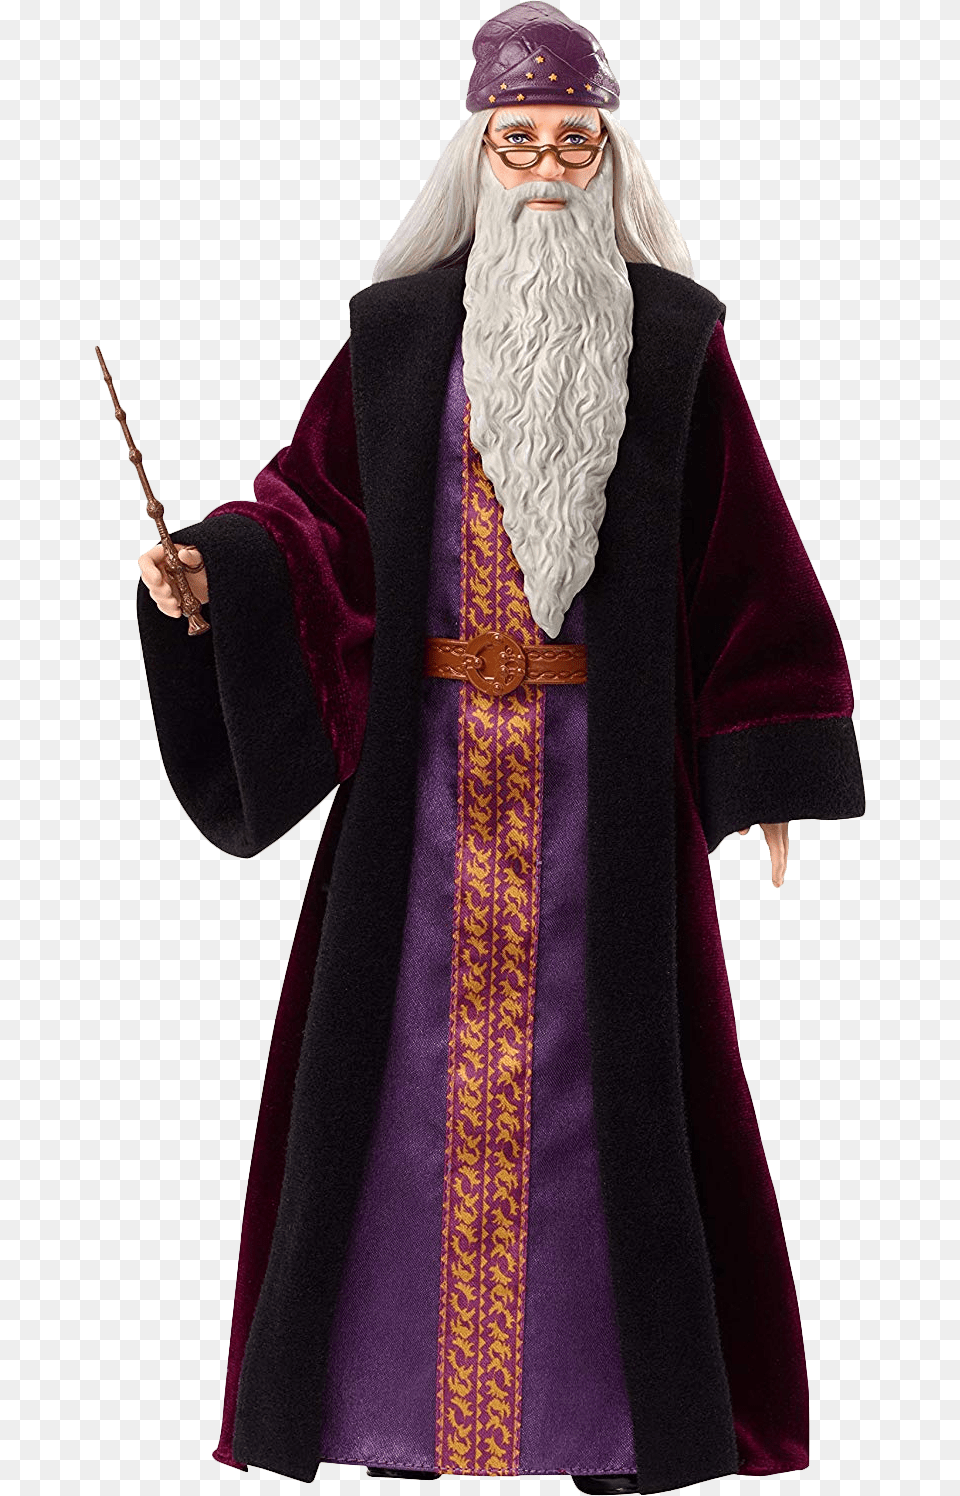 Harry Potter And The Chamber Of Secrets Harry Potter Barbie Dumbledore, Fashion, Adult, Male, Man Png